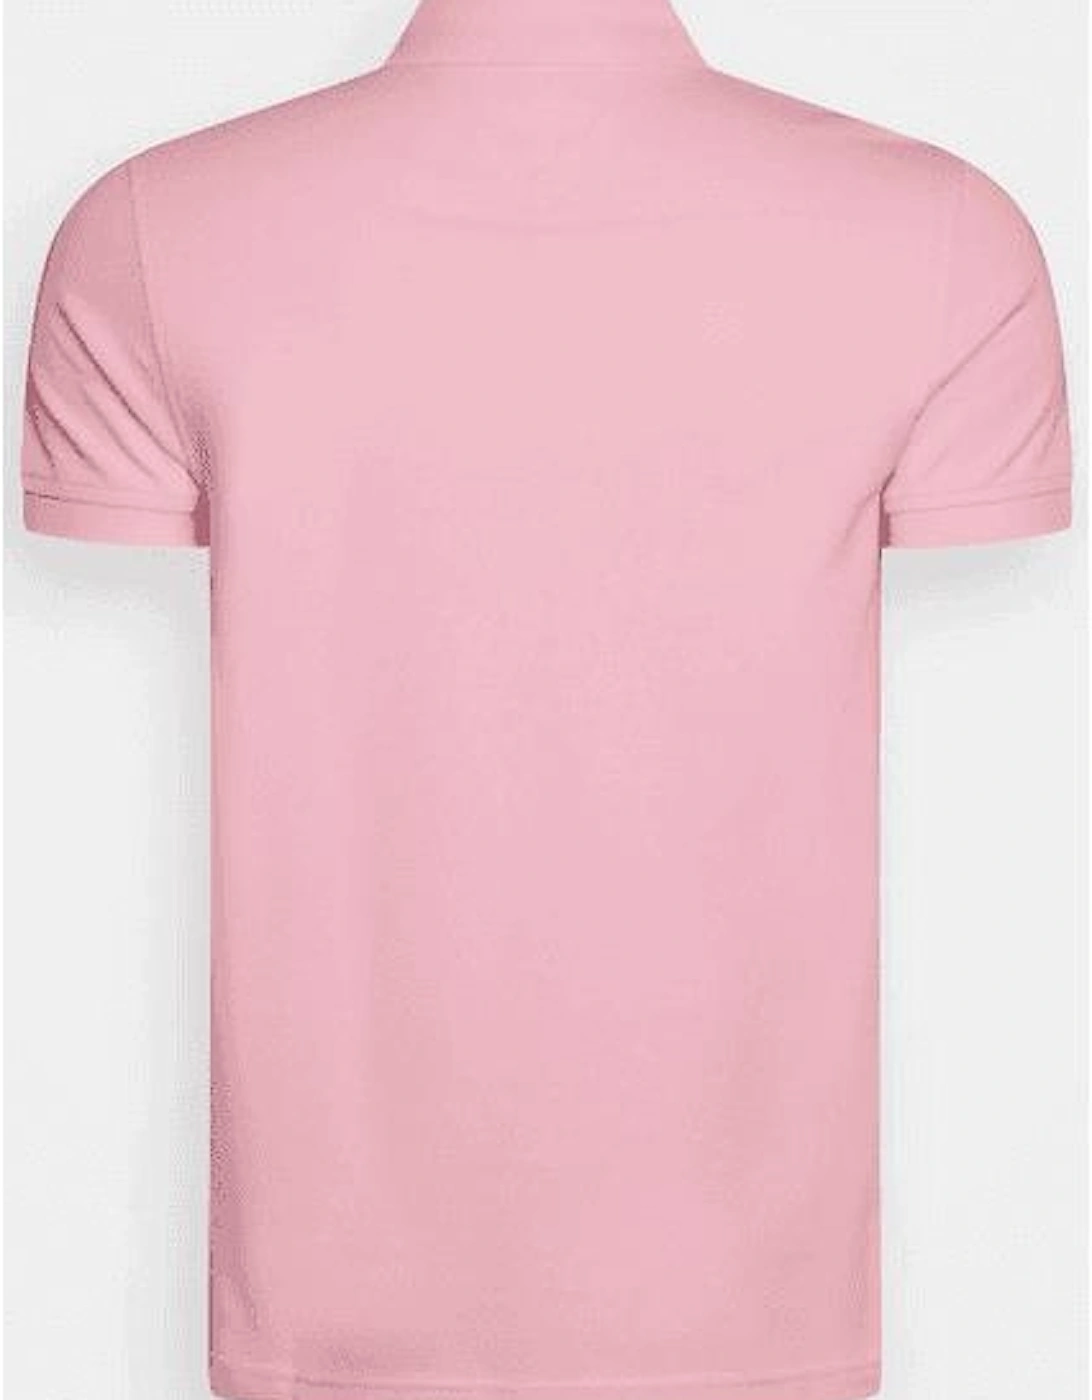 Classic 1985 Slim Fit Pink Polo Shirt